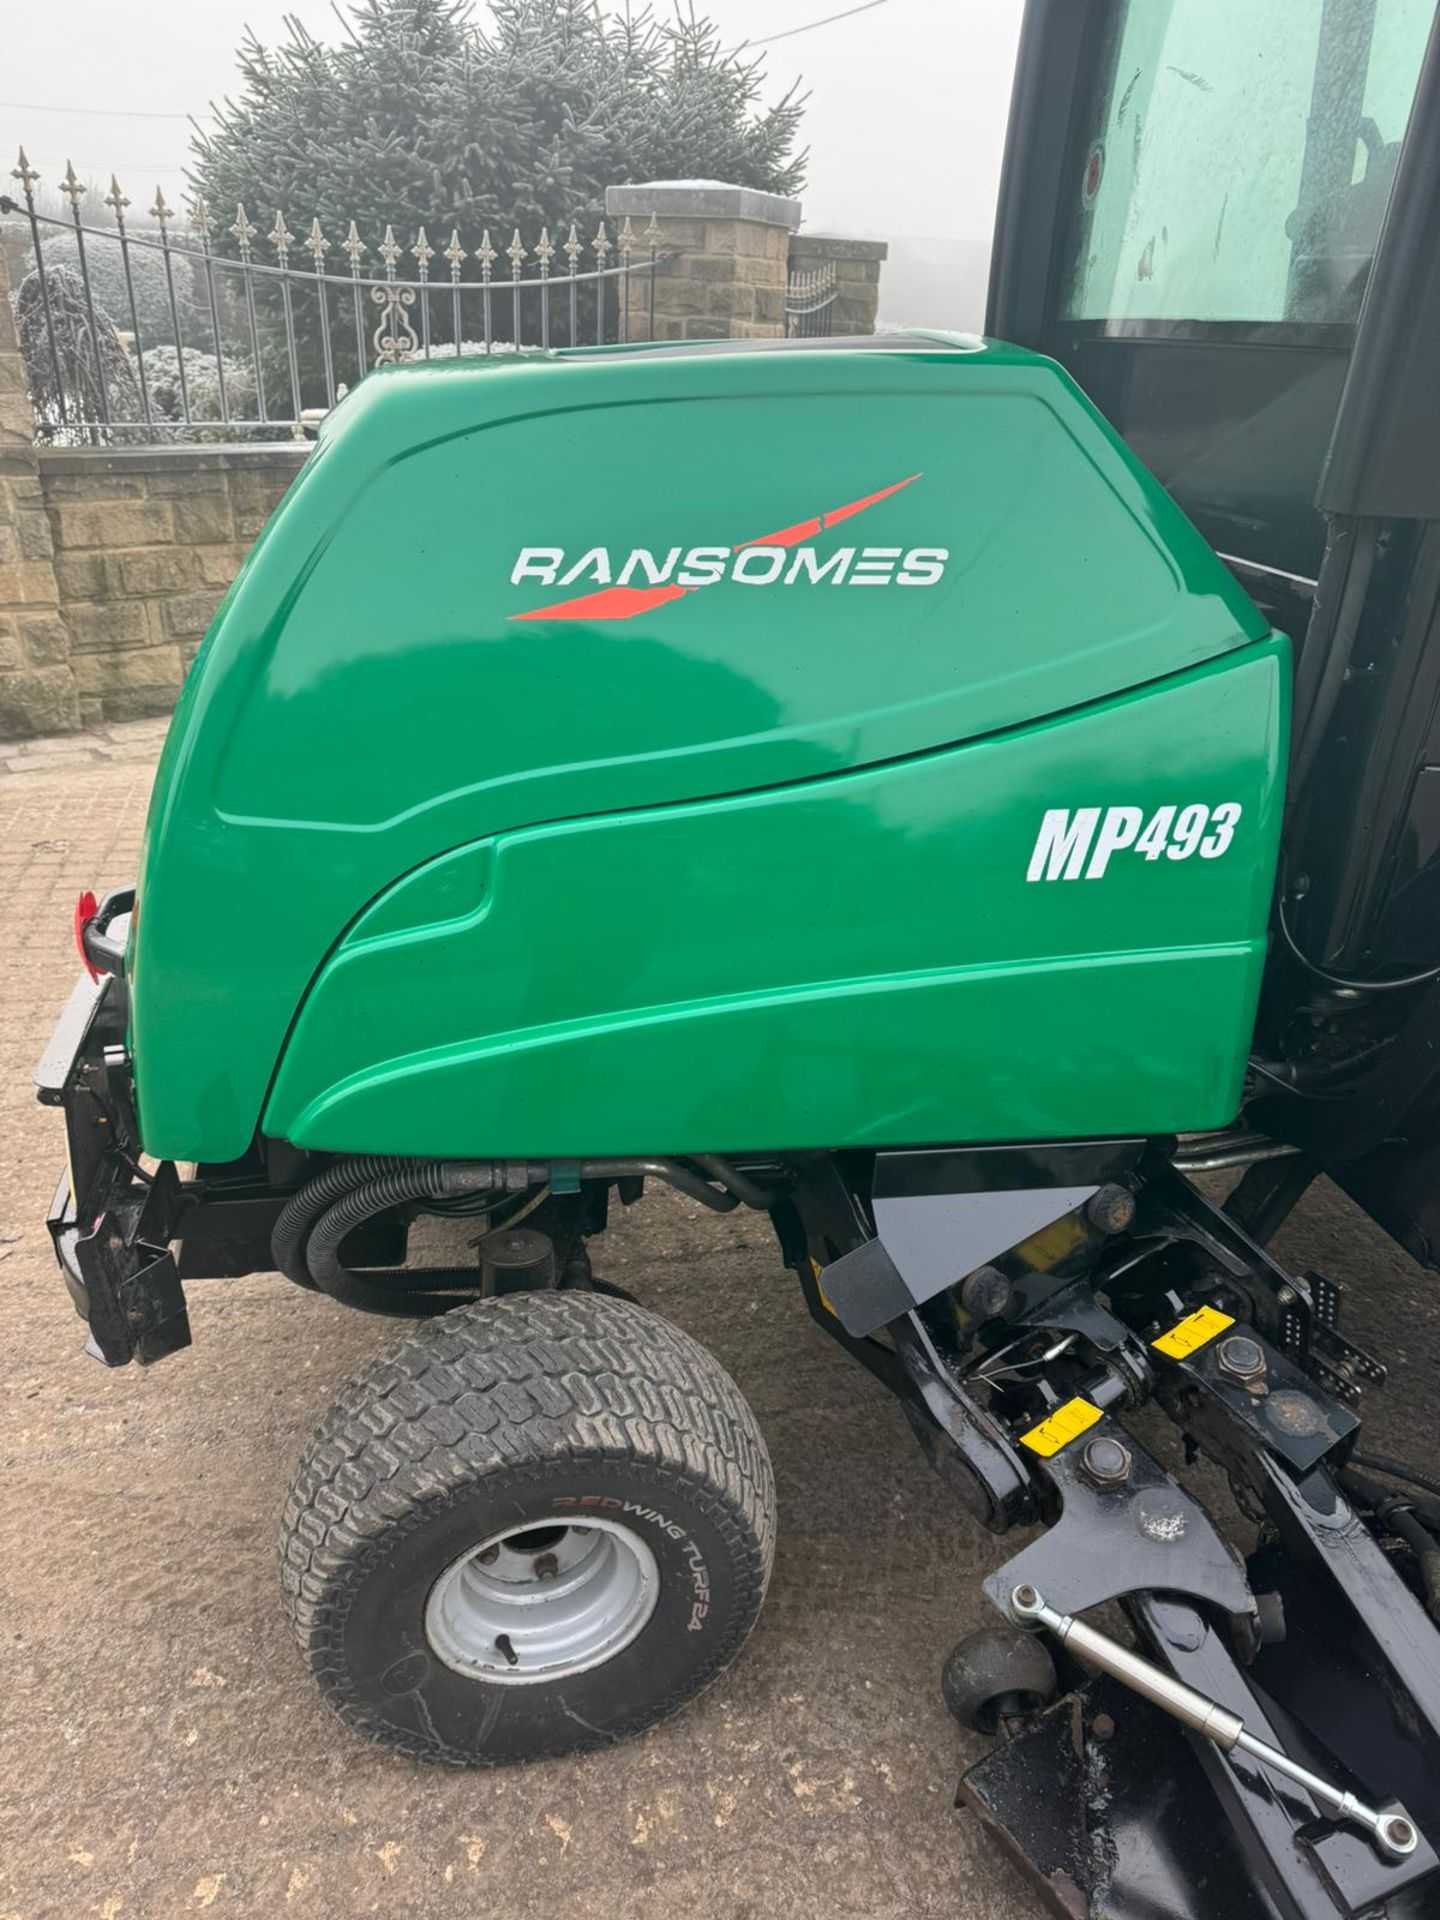 2016 RANSOMES RMP493 BATWING RIDE ON LAWN MOWER WITH FULL GLASS CAB *PLUS VAT* - Image 19 of 33